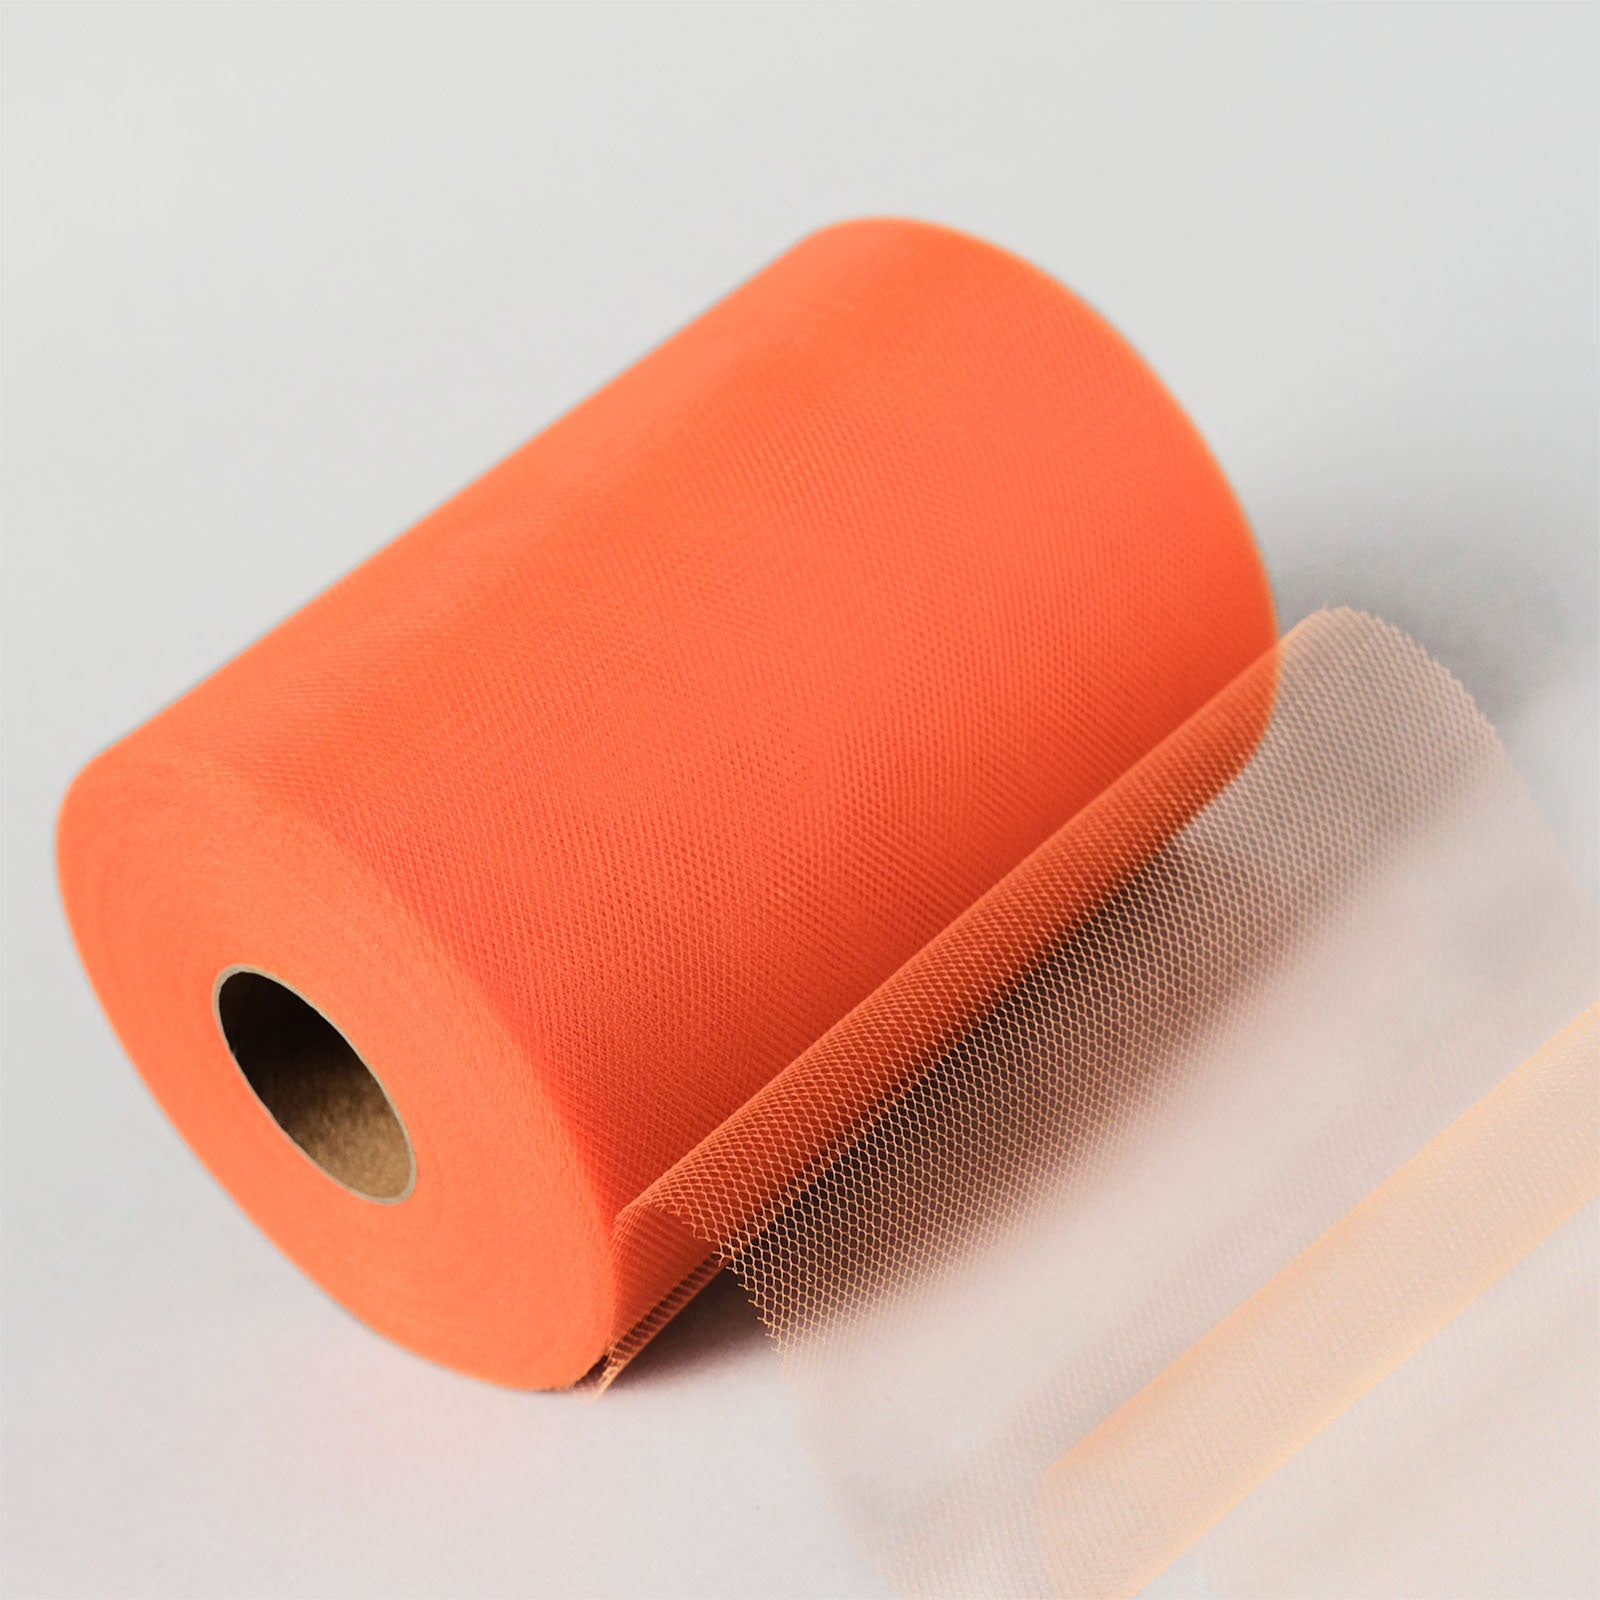 Tableclothsfactory 6 inch x 100 Yards Orange Tulle Rolls Wholesale